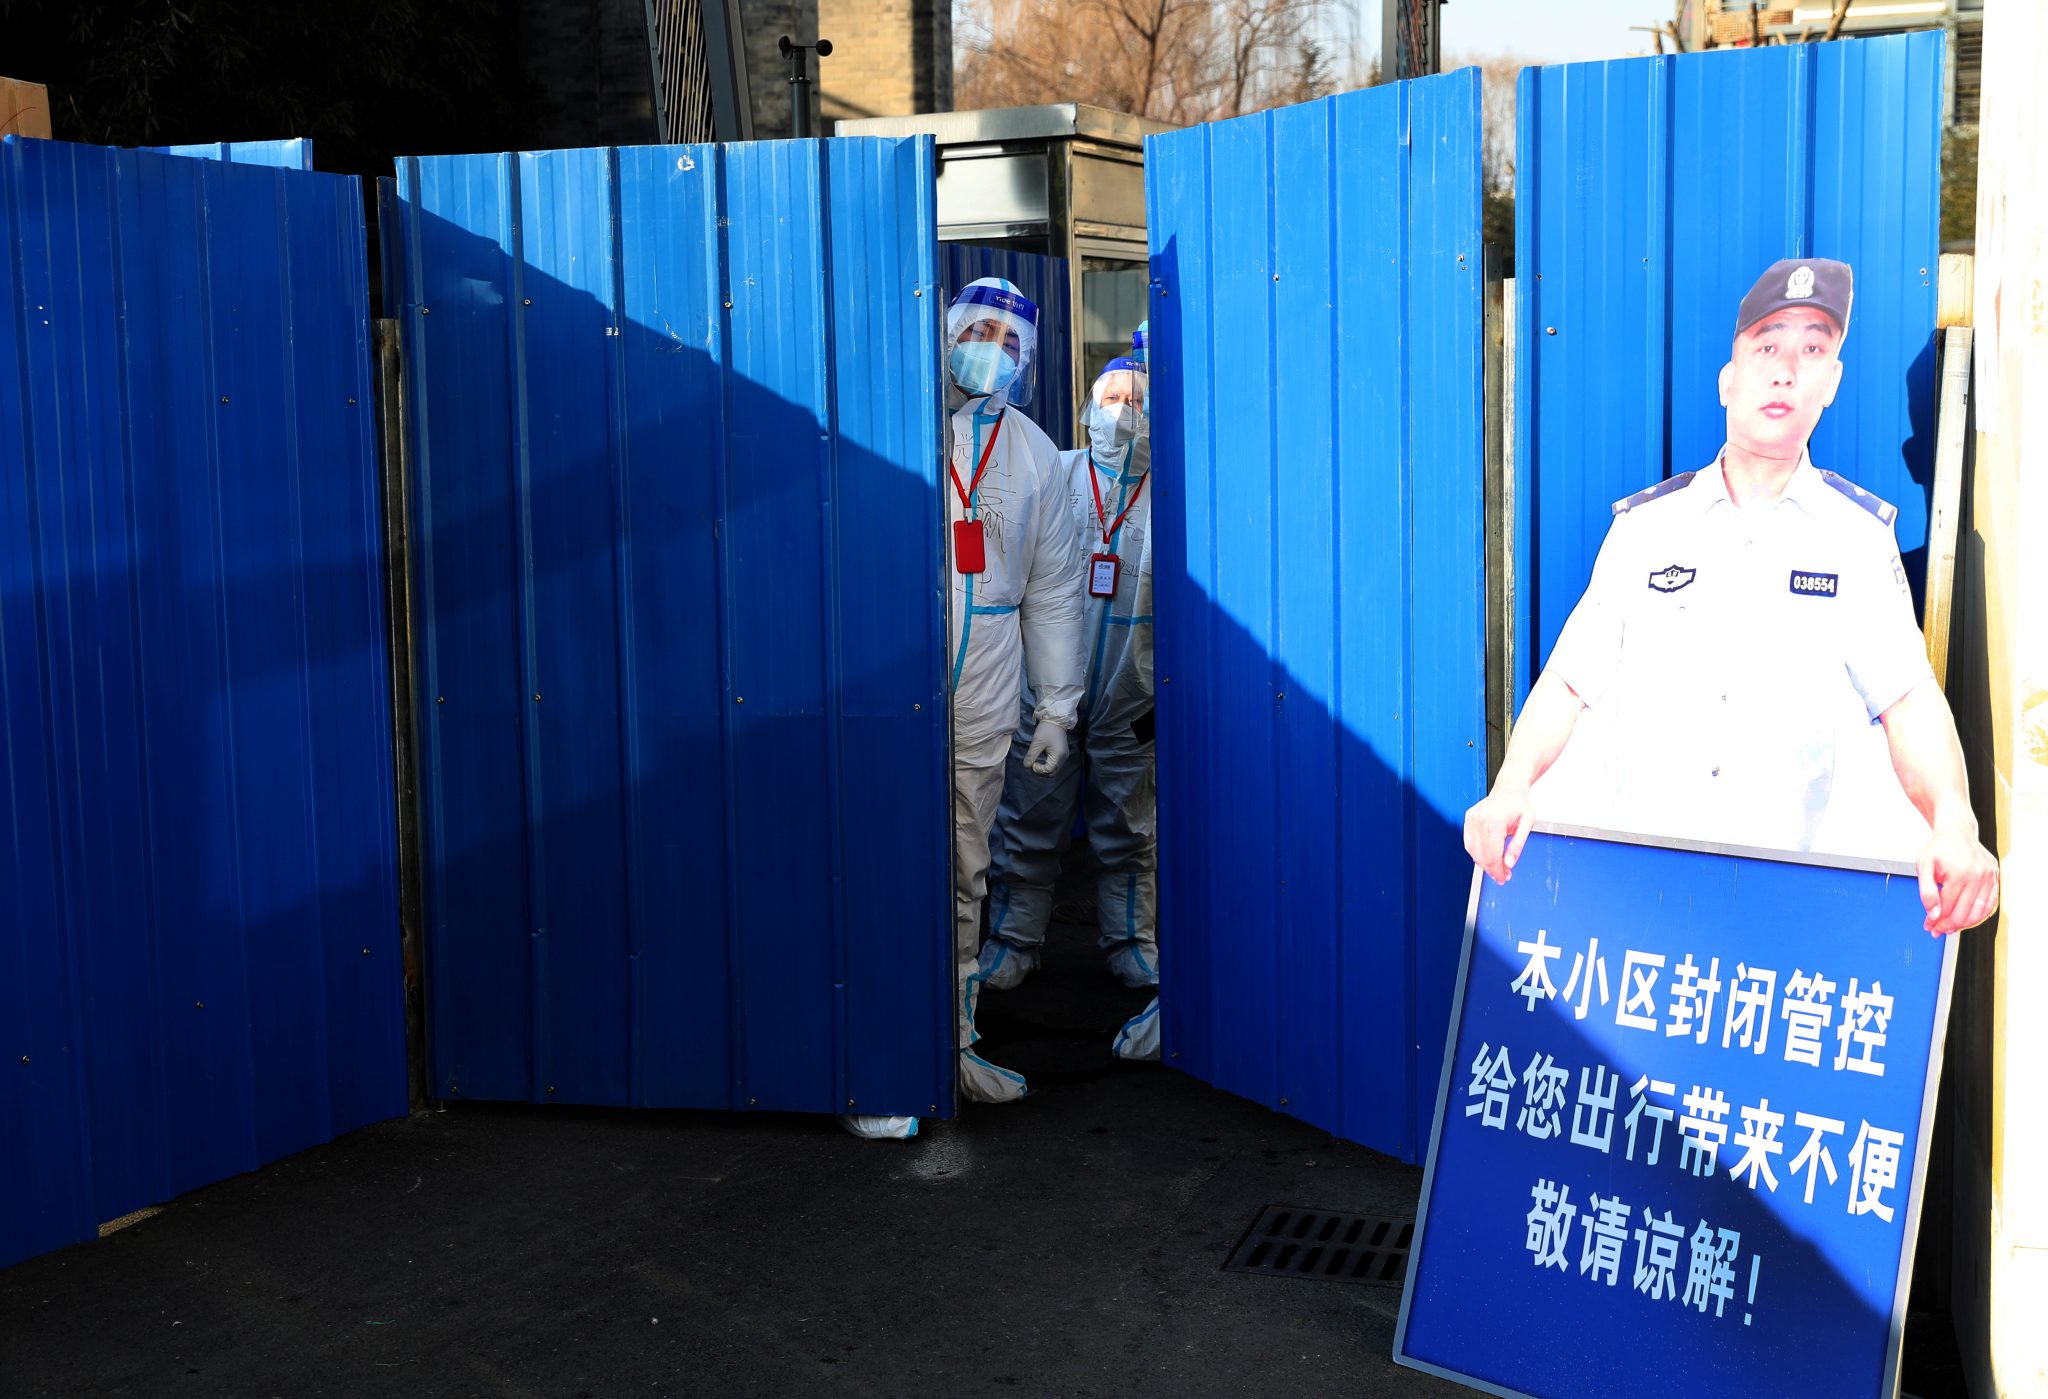 China’s pandemic strategy is unlikely to change any time soon